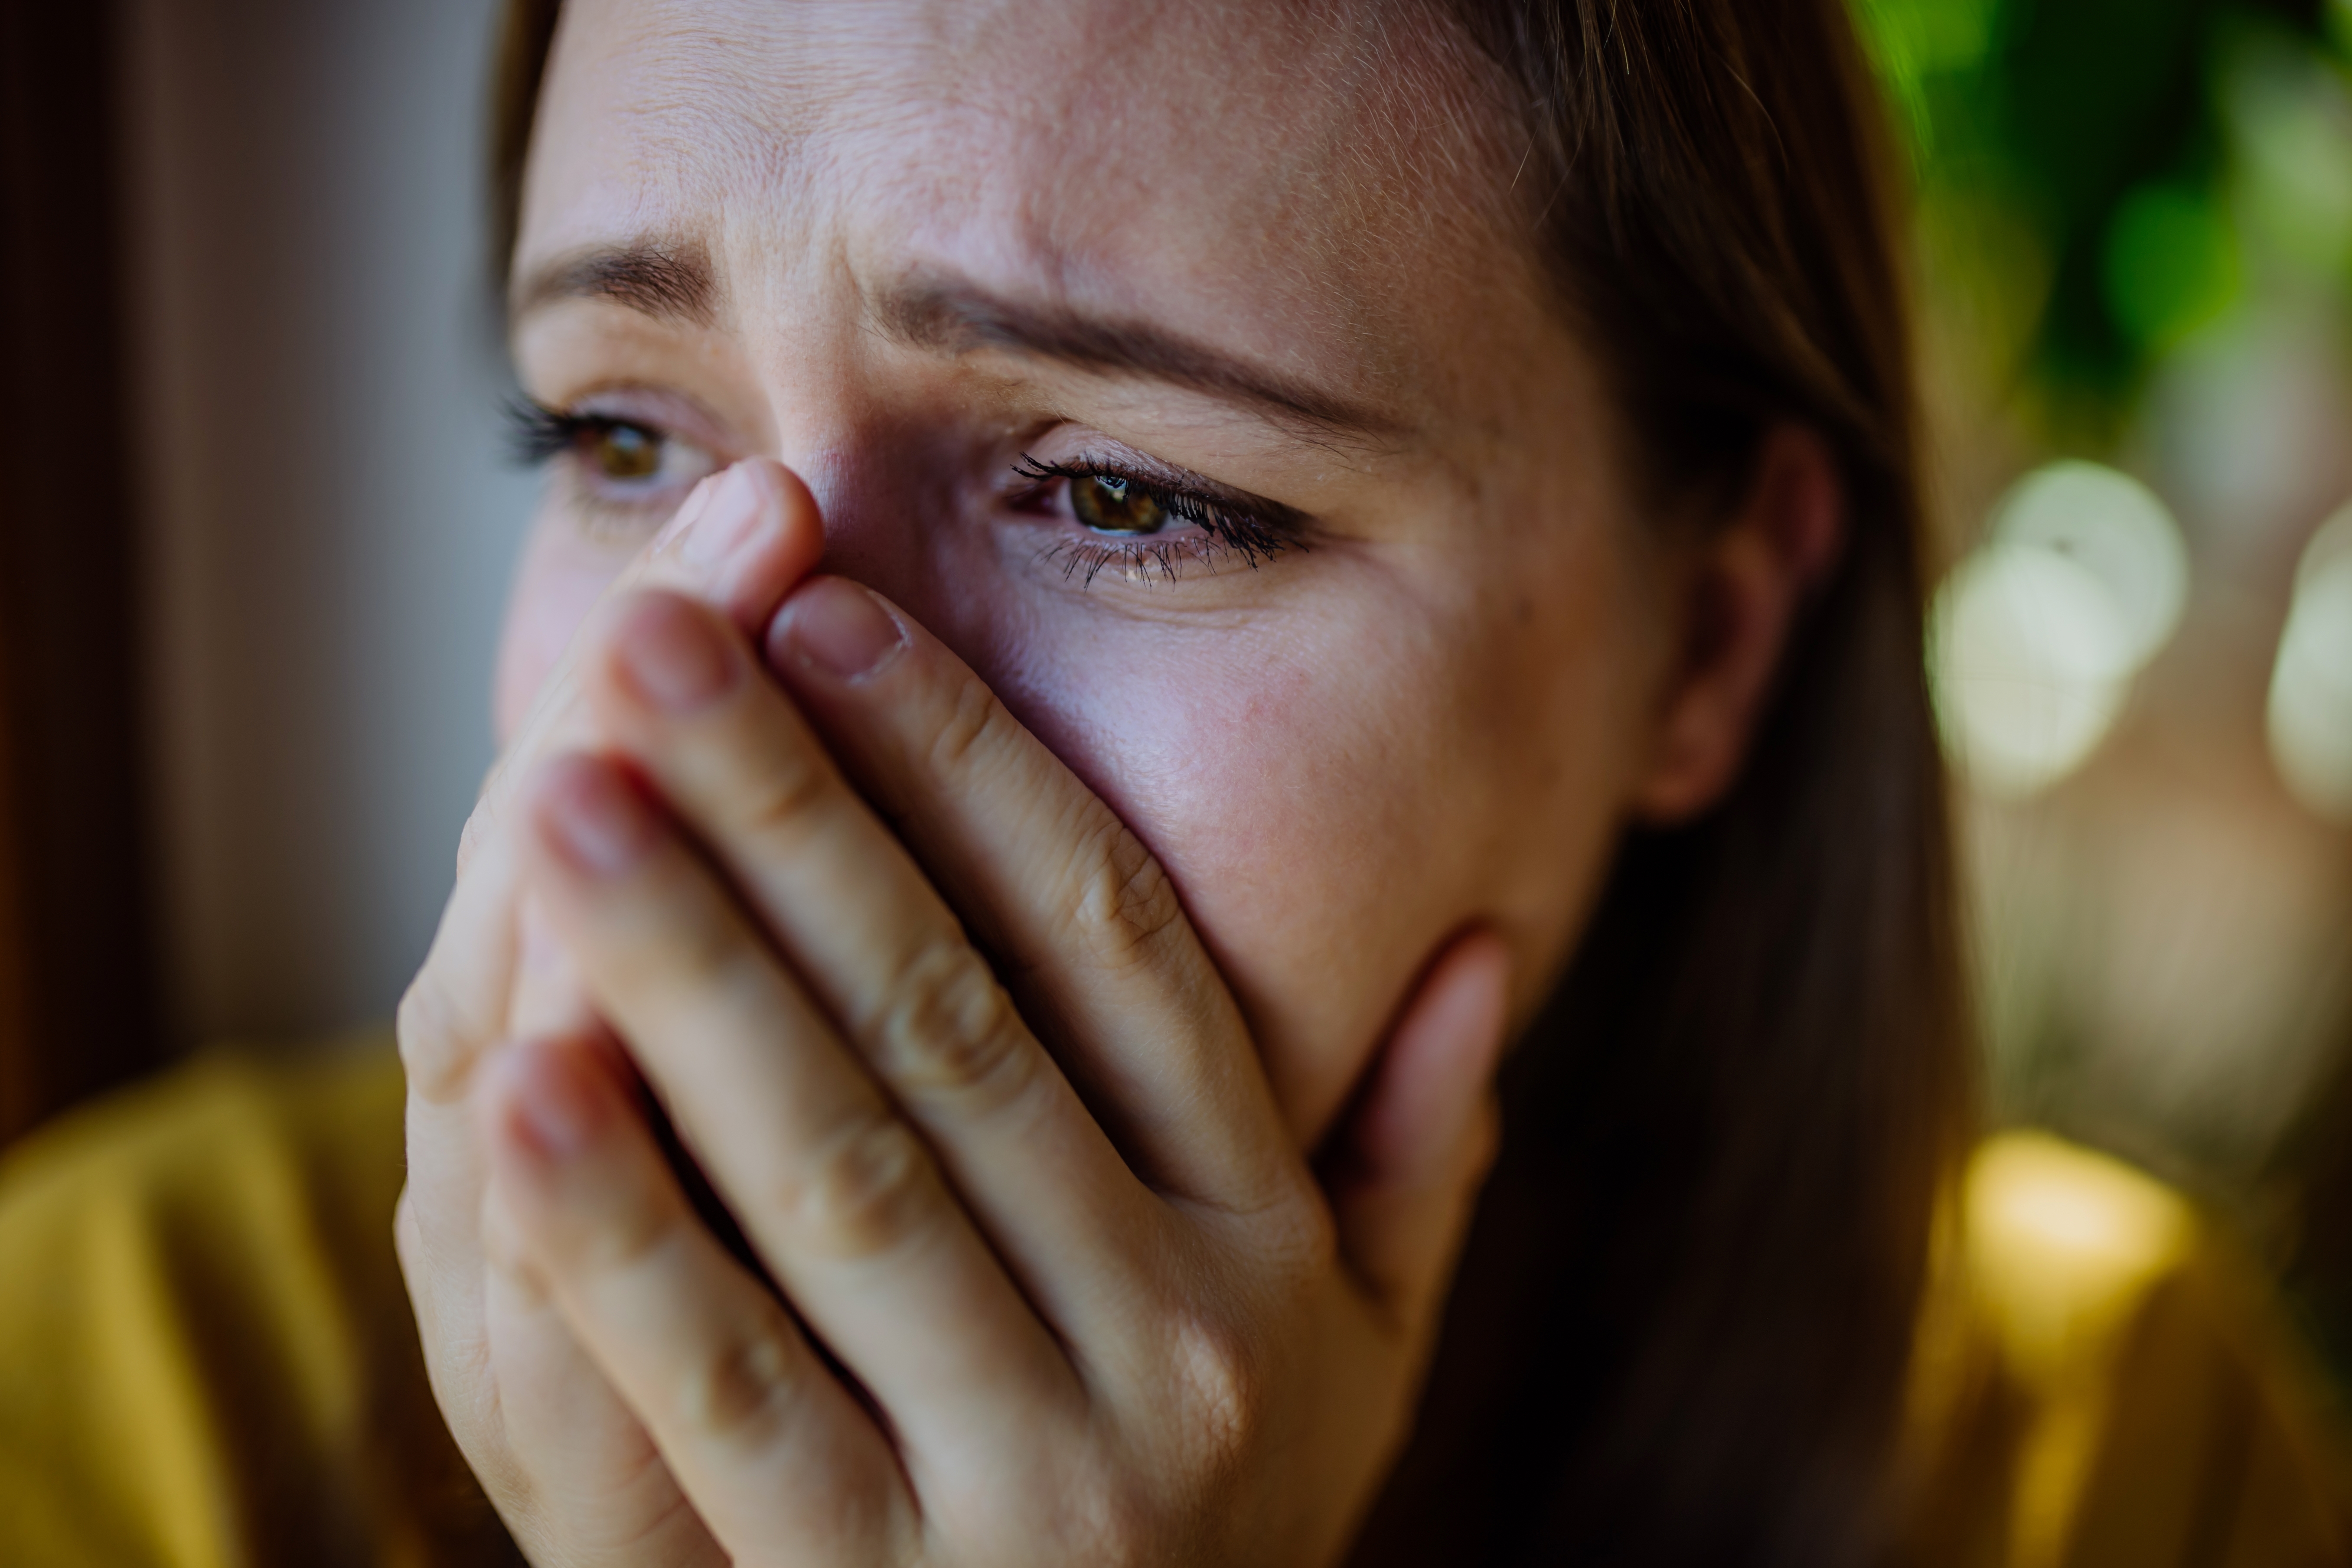 Woman suffering from depression | Source: Shutterstock